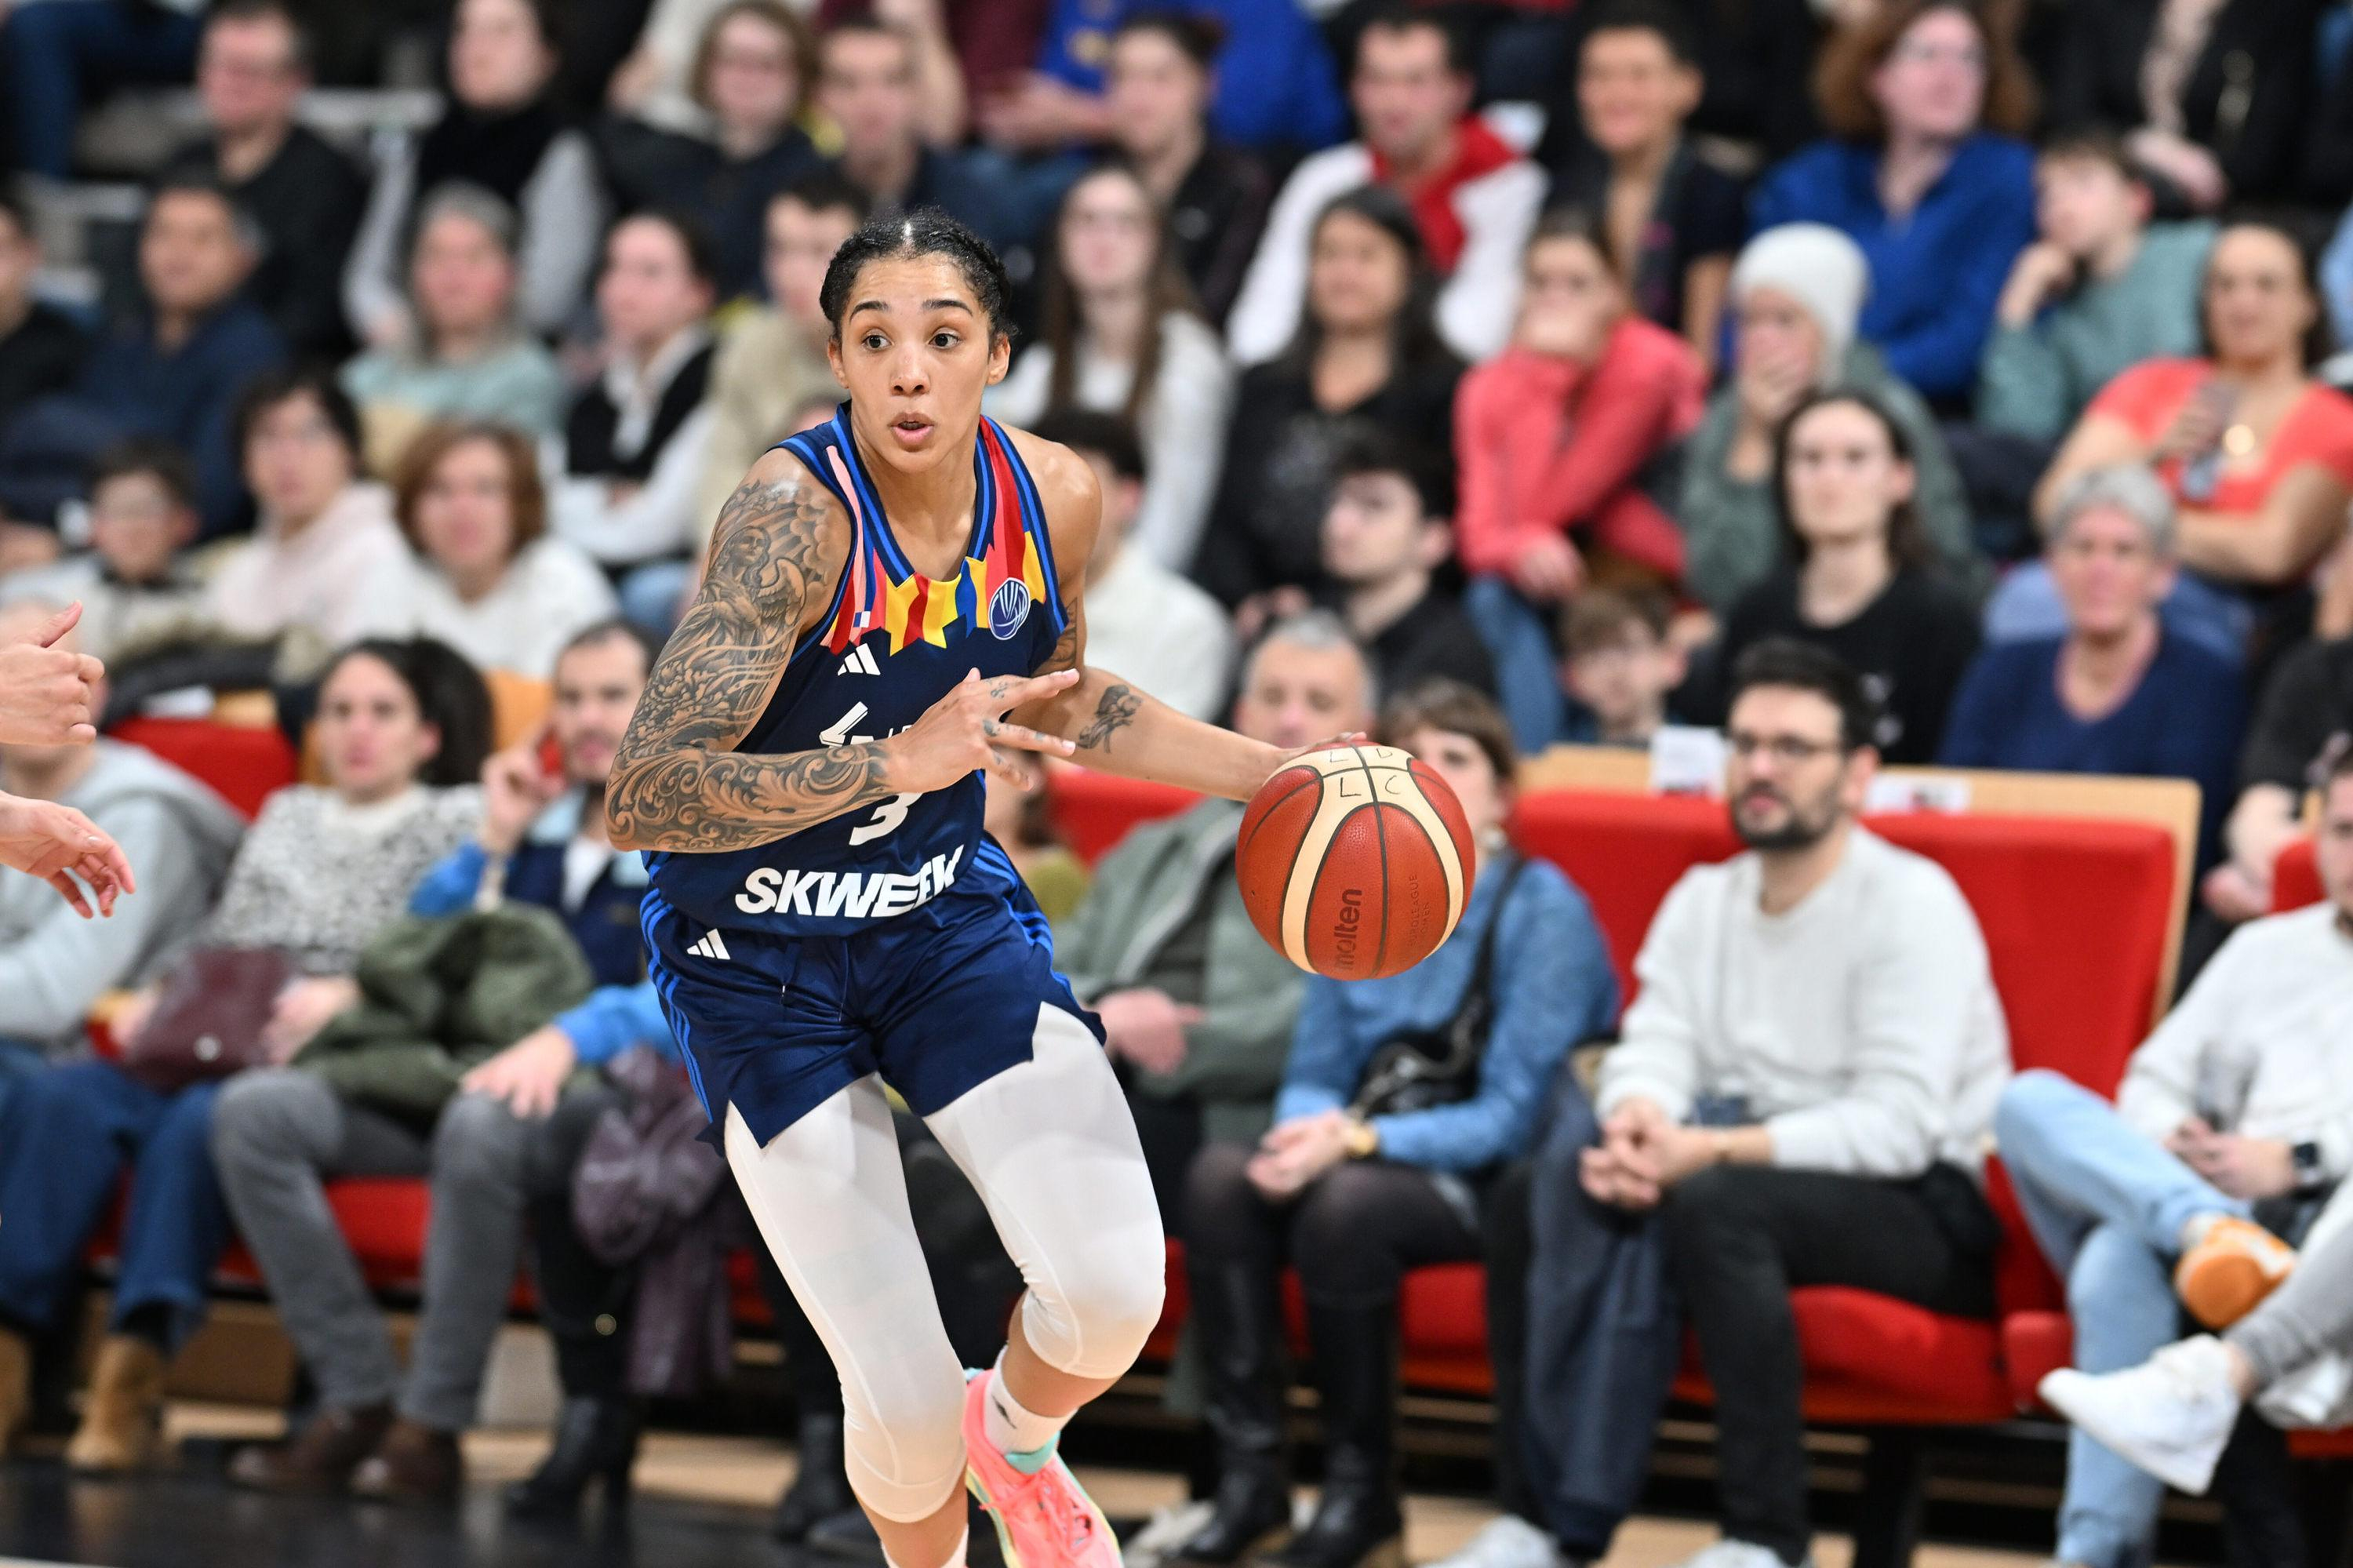 Basketball: Asvel makes a report about the “behavior” of the opposing coach towards Gabby Williams